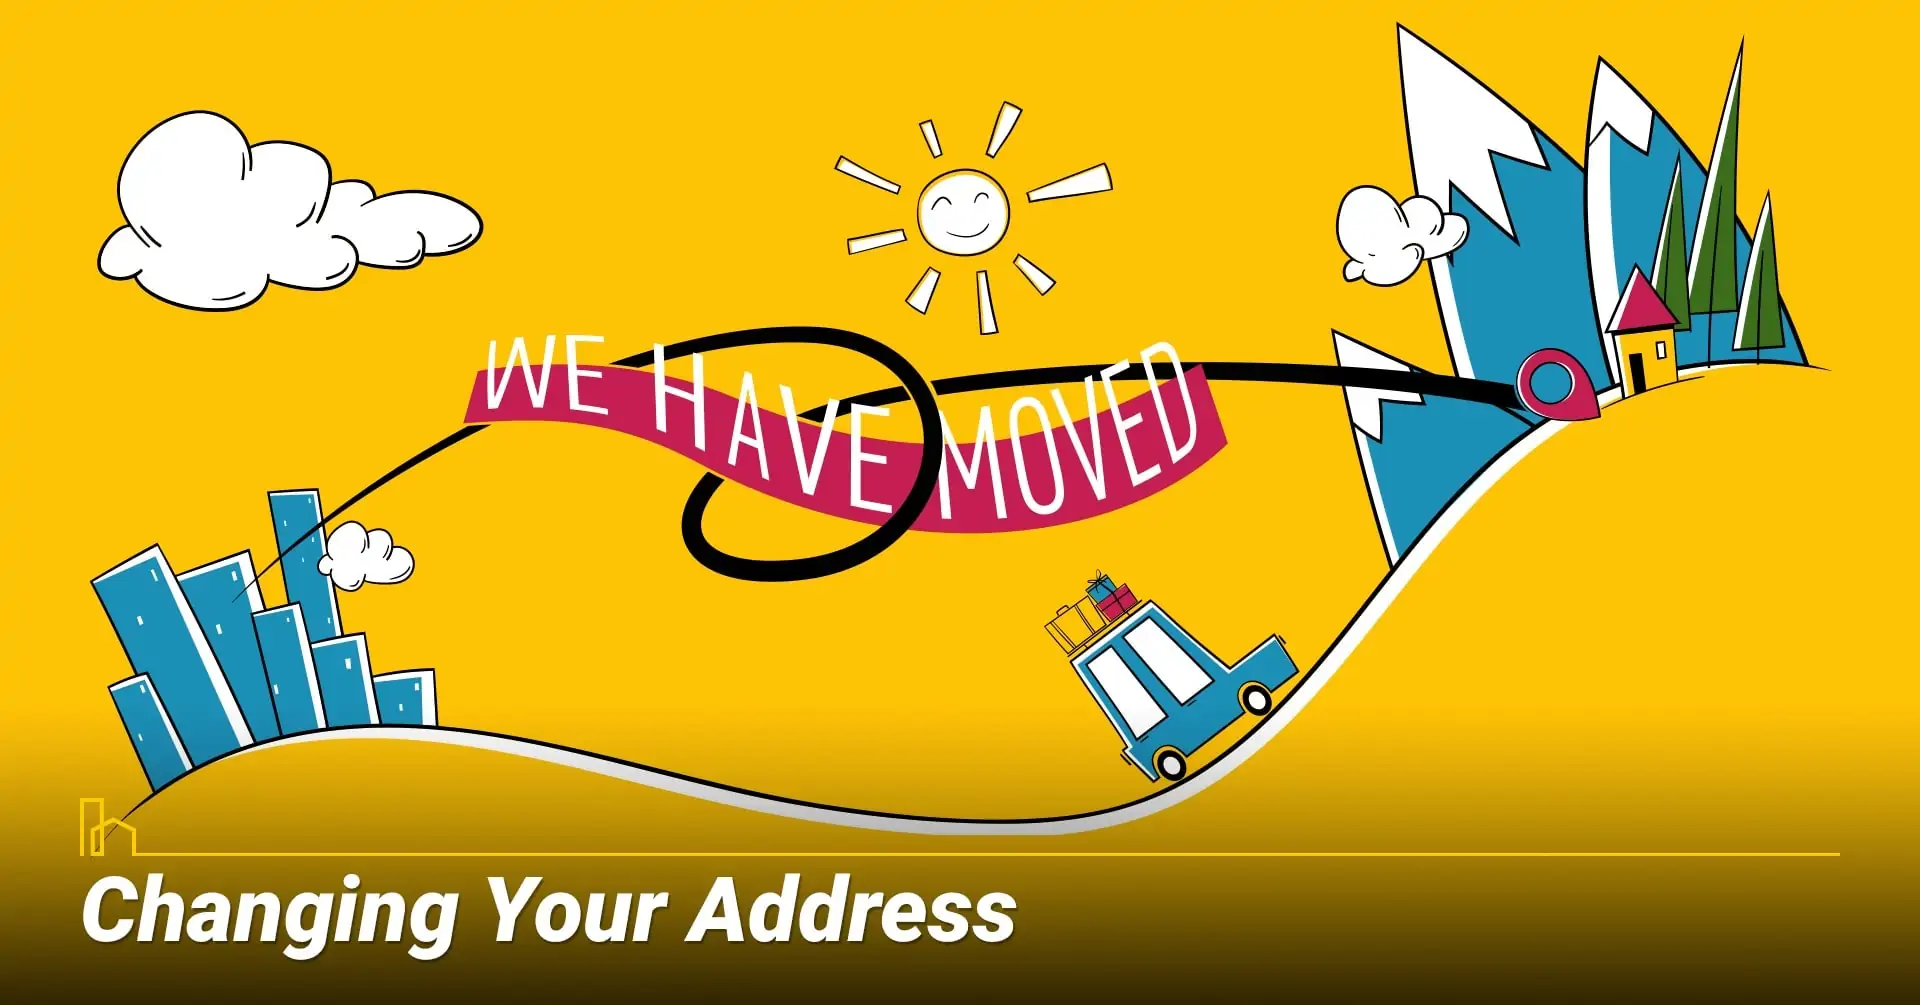 Changing Your Address, update your new mailing address